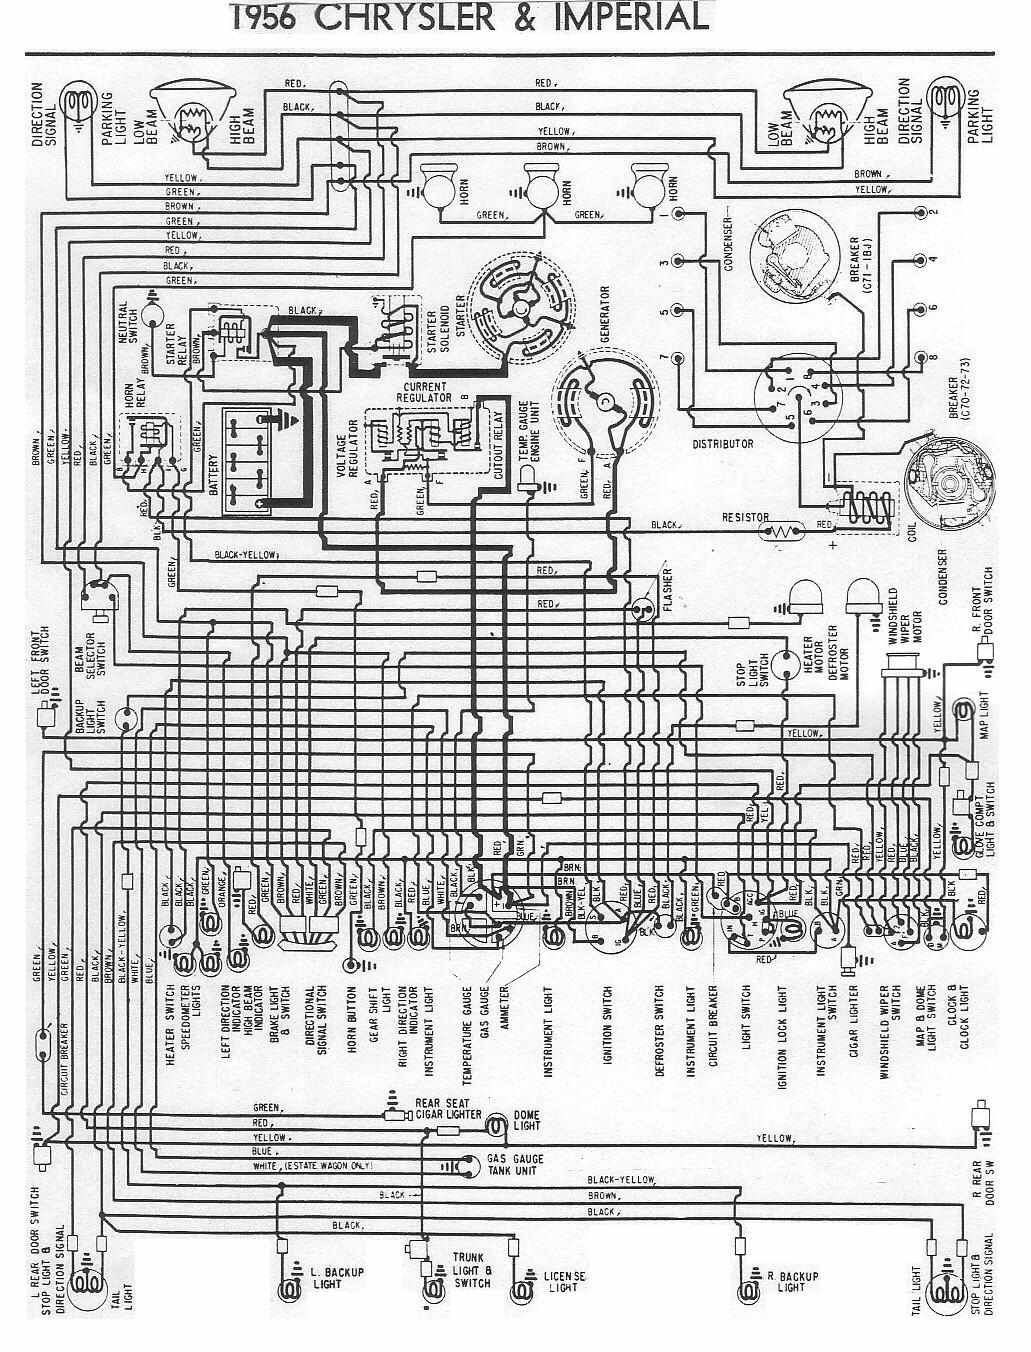 Electrical Wiring Diagrams Of 1956 Chrysler And Imperial